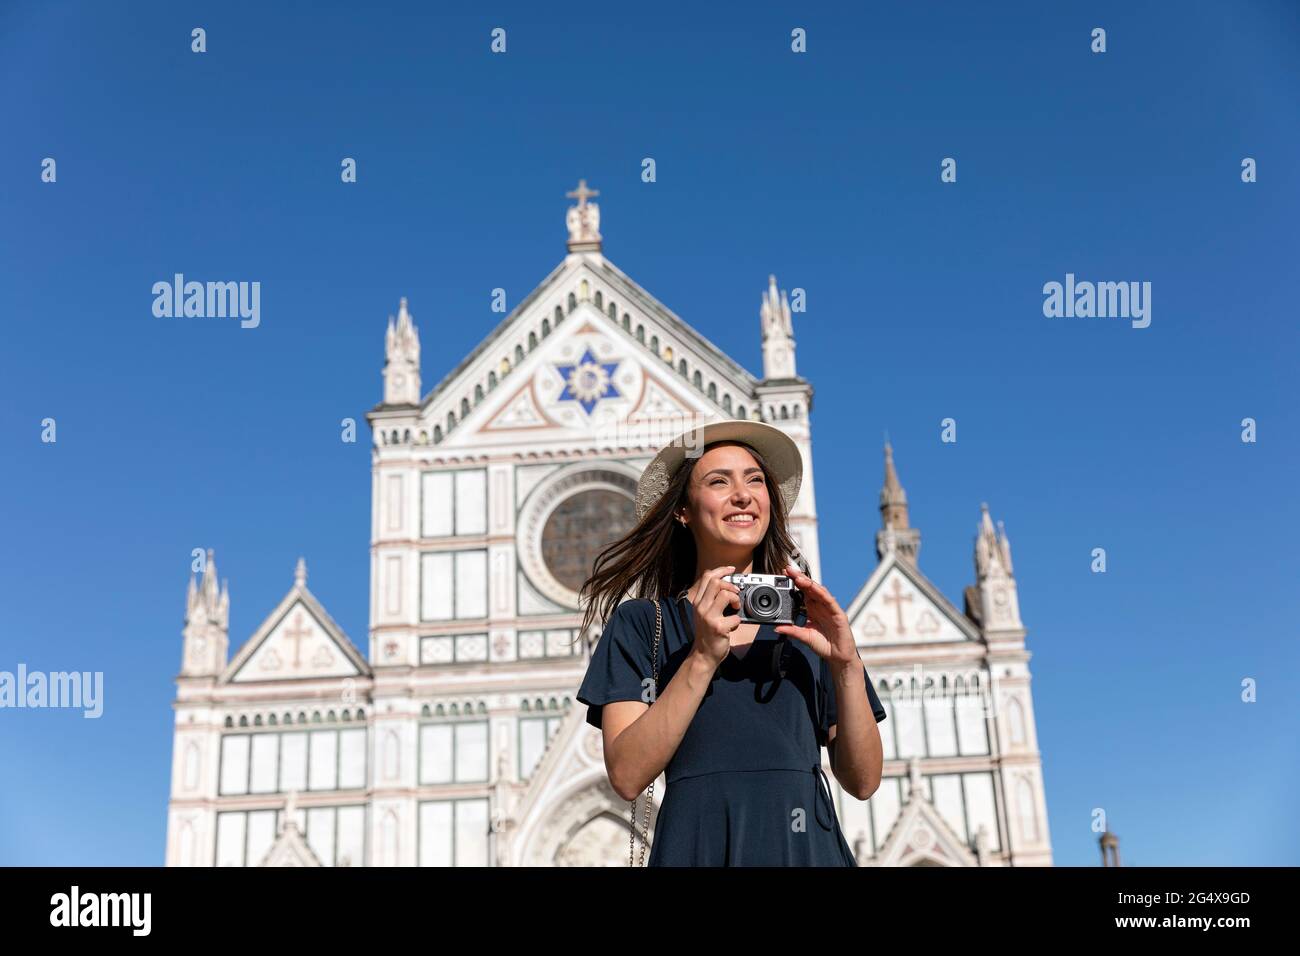 Smiling female tourist standing with camera in front of Basilica Of Santa Croce, Florence, Italy Stock Photo